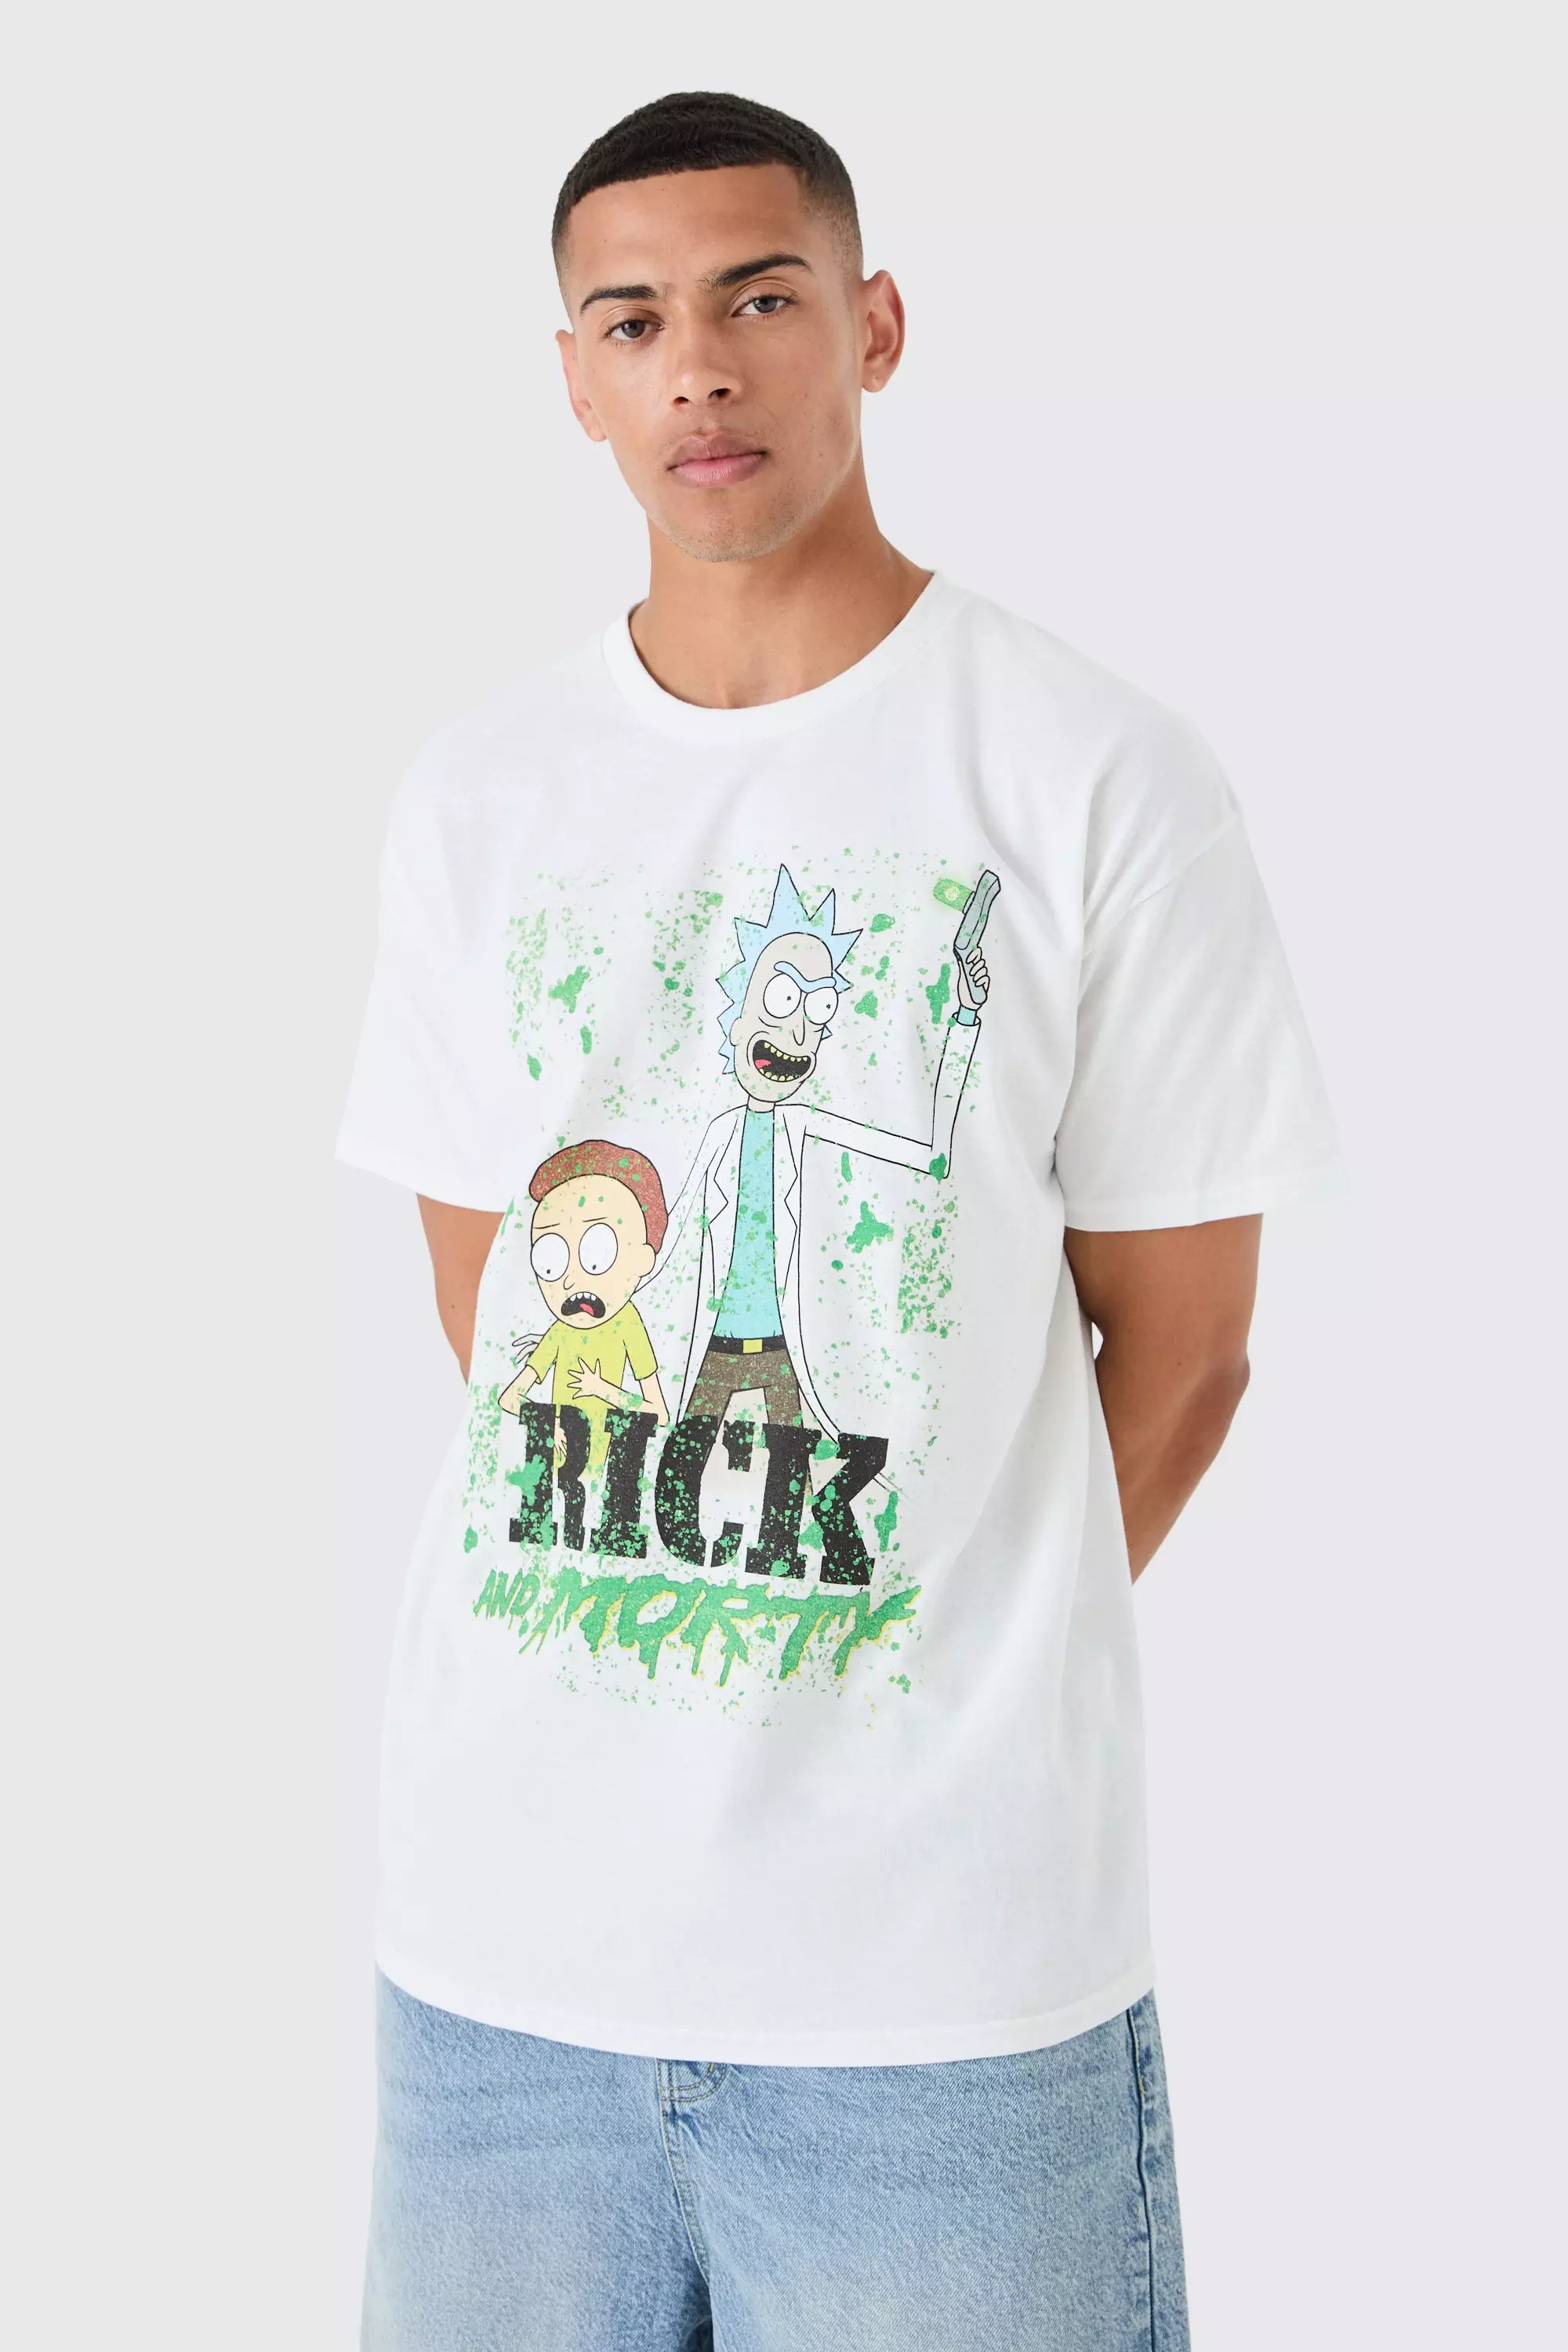 Oversized Rick And Morty License T-shirt White